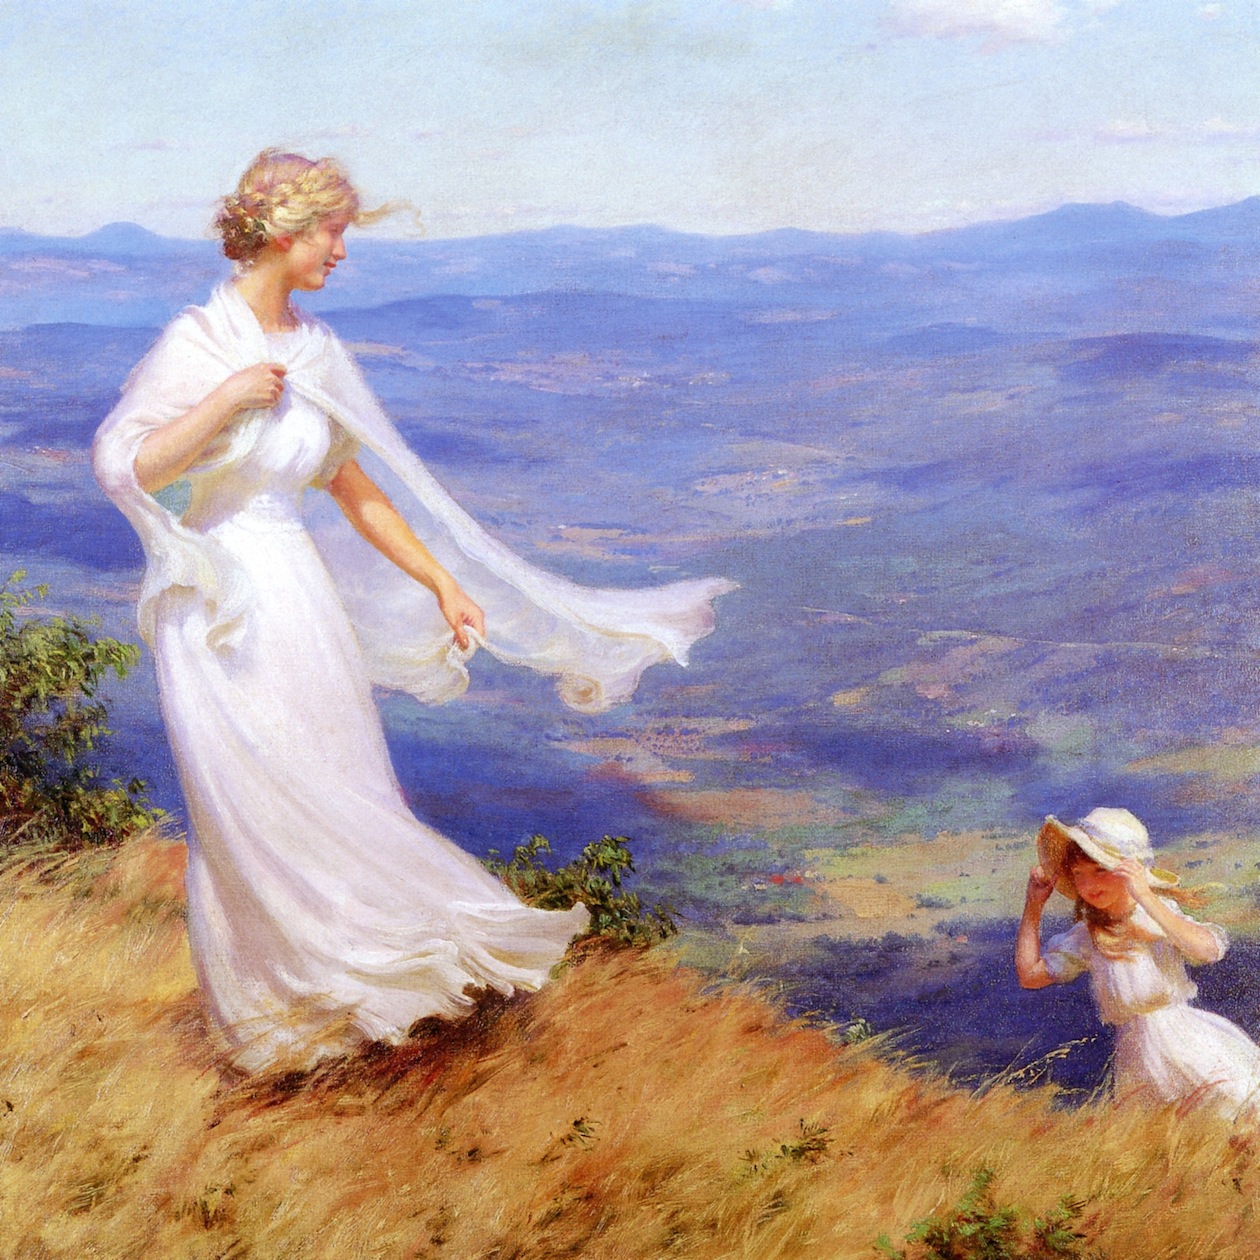 The West Wind by Charles Courtney Curran - 1918